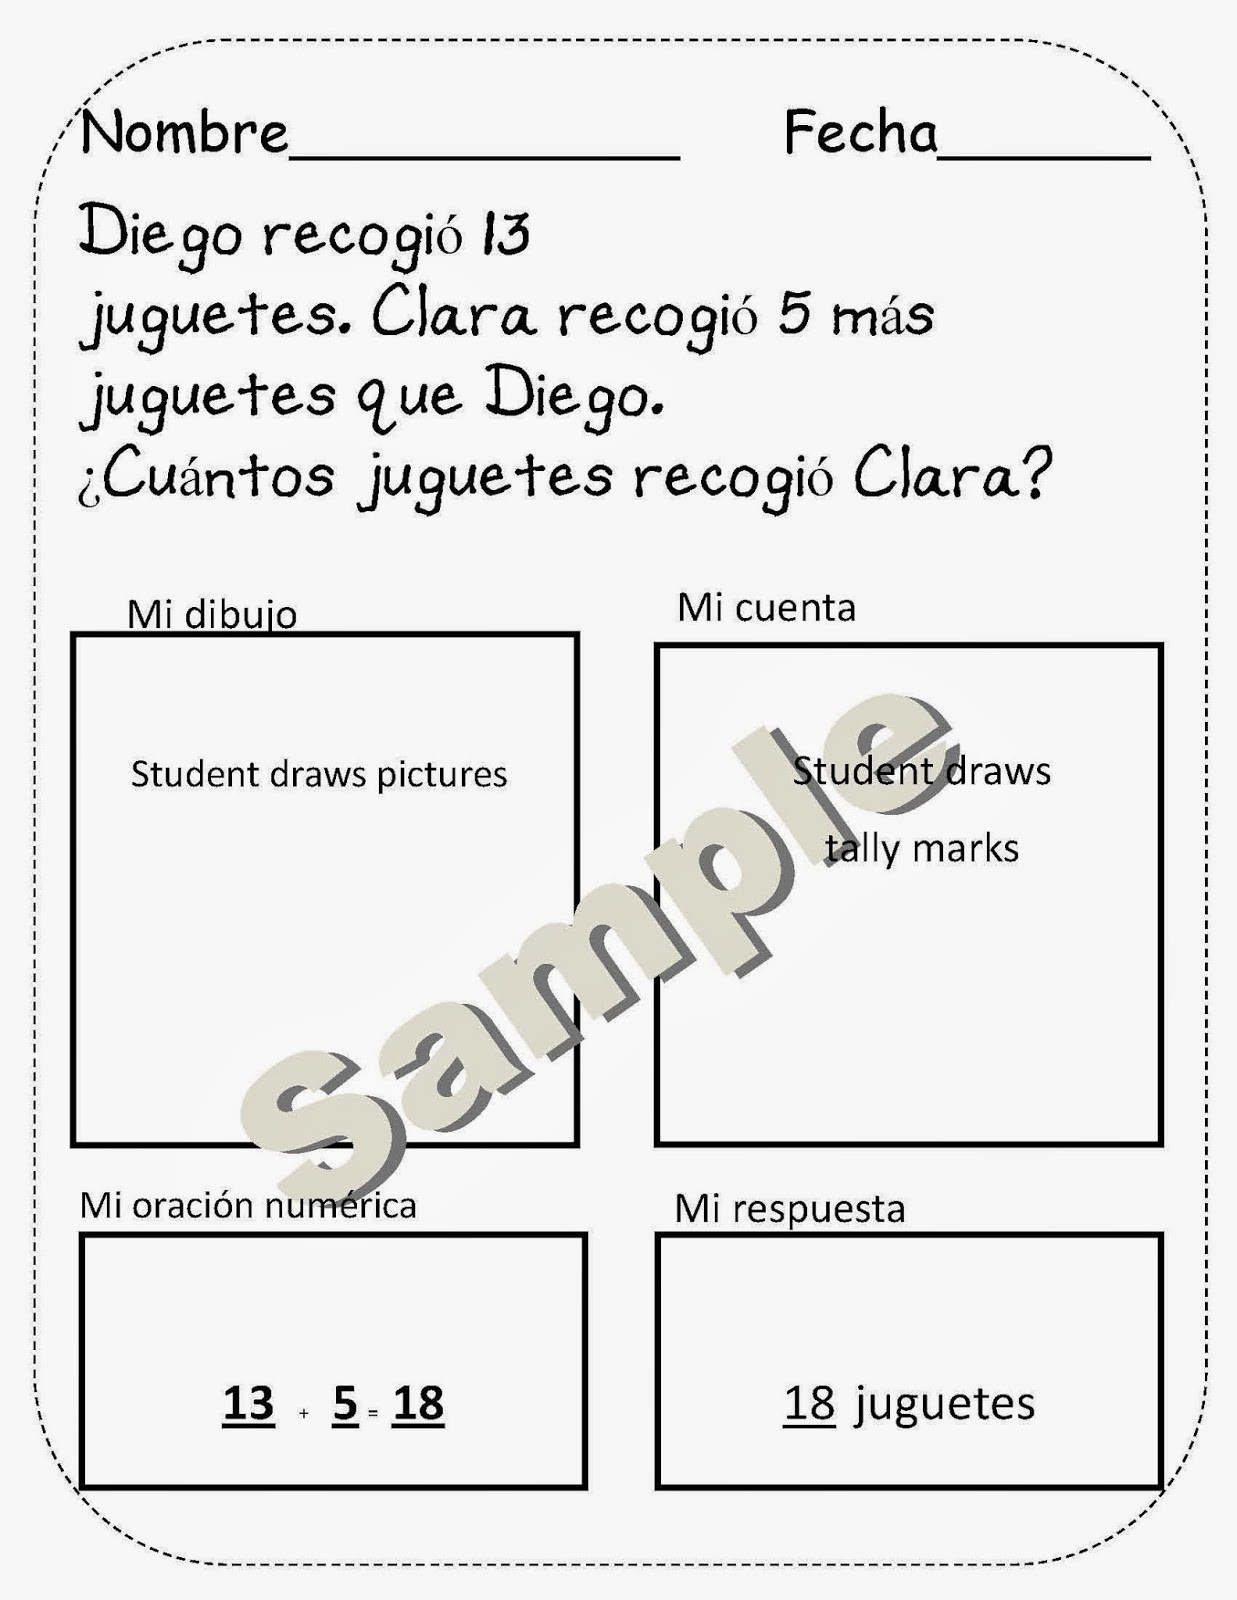 Free Math Worksheets First Grade 1 Addition Add 2 2 Digit Numbers Missing Addend No Regrouping